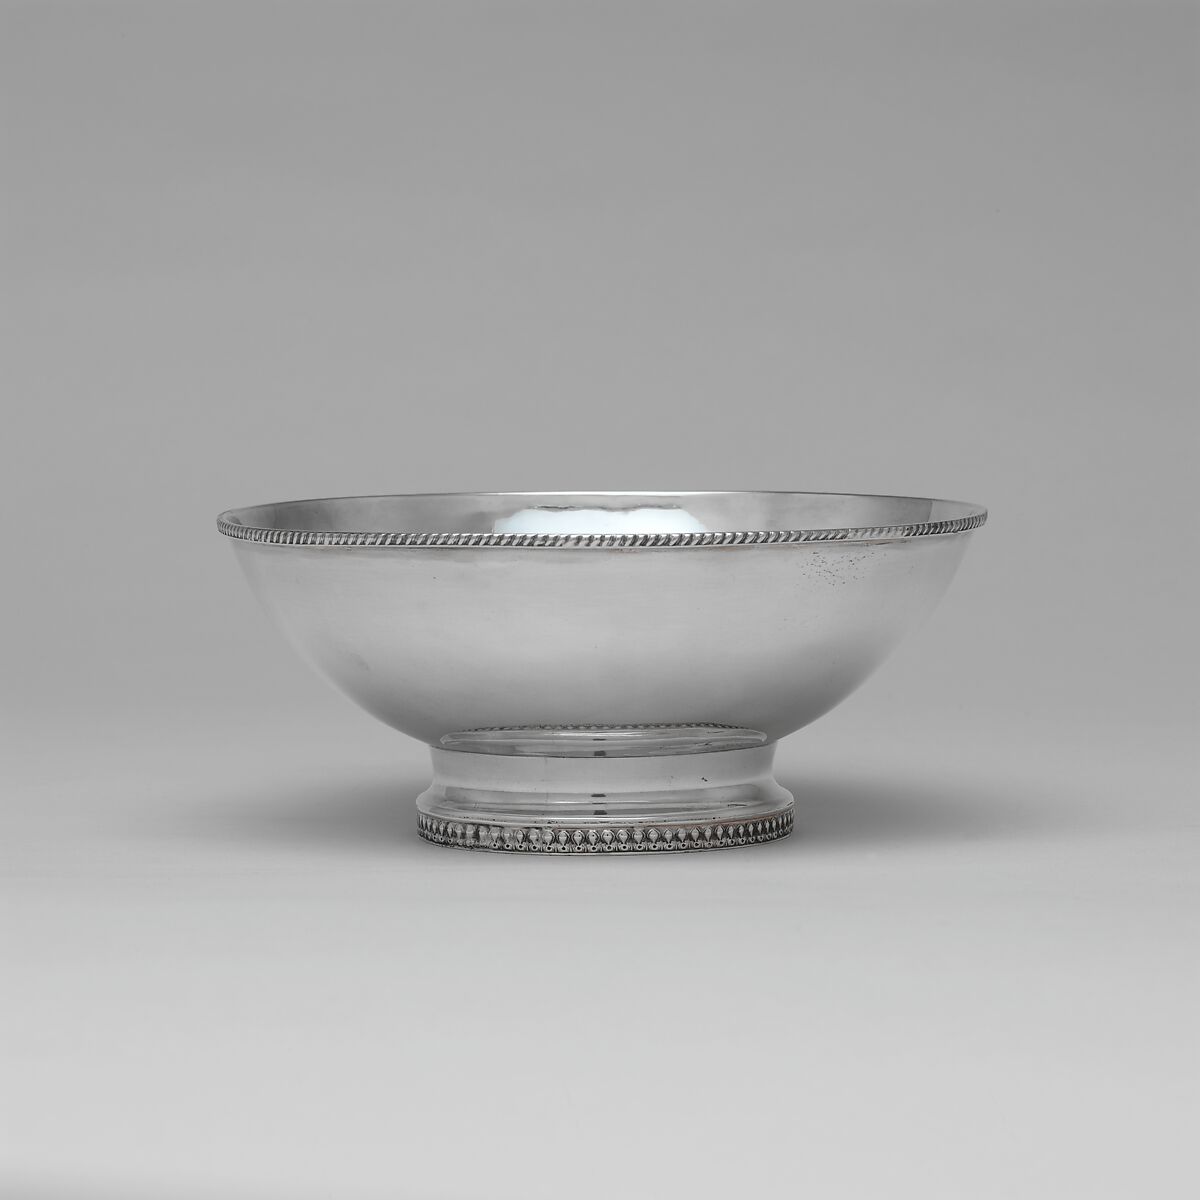 Punch Bowl, Chauncey Johnson (active ca. 1825–41), Silver, American 